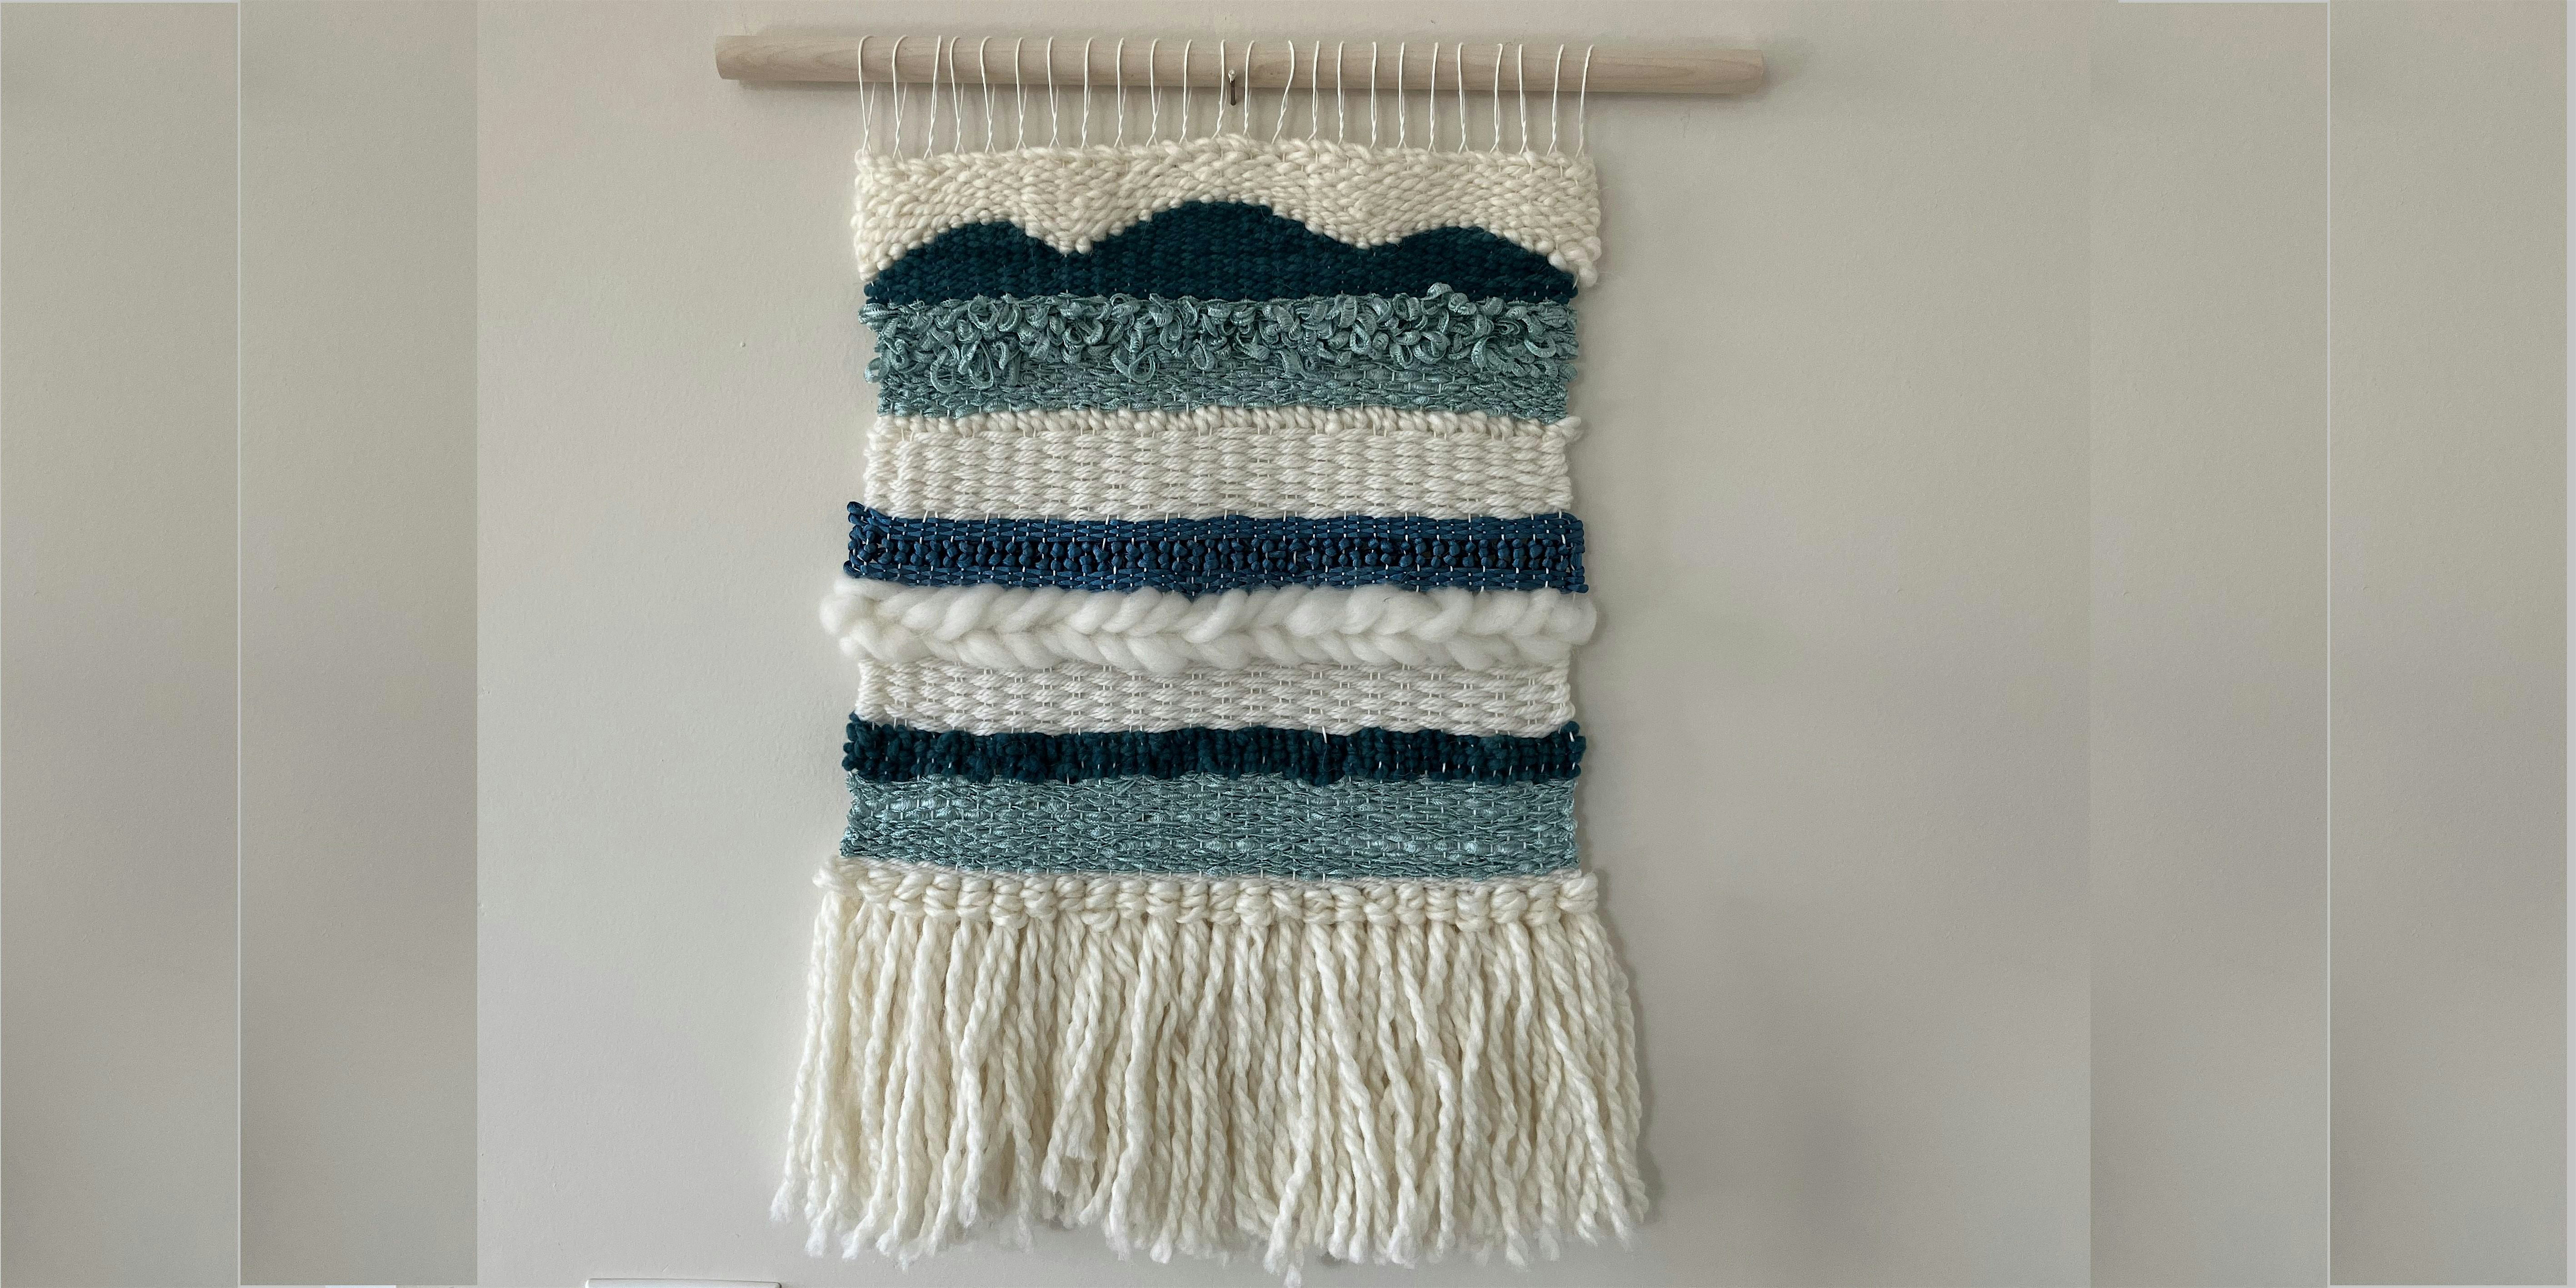 Let\u2019s Make a Wall-hanging: Textures and Tapestry!  - Adult Summer Camp